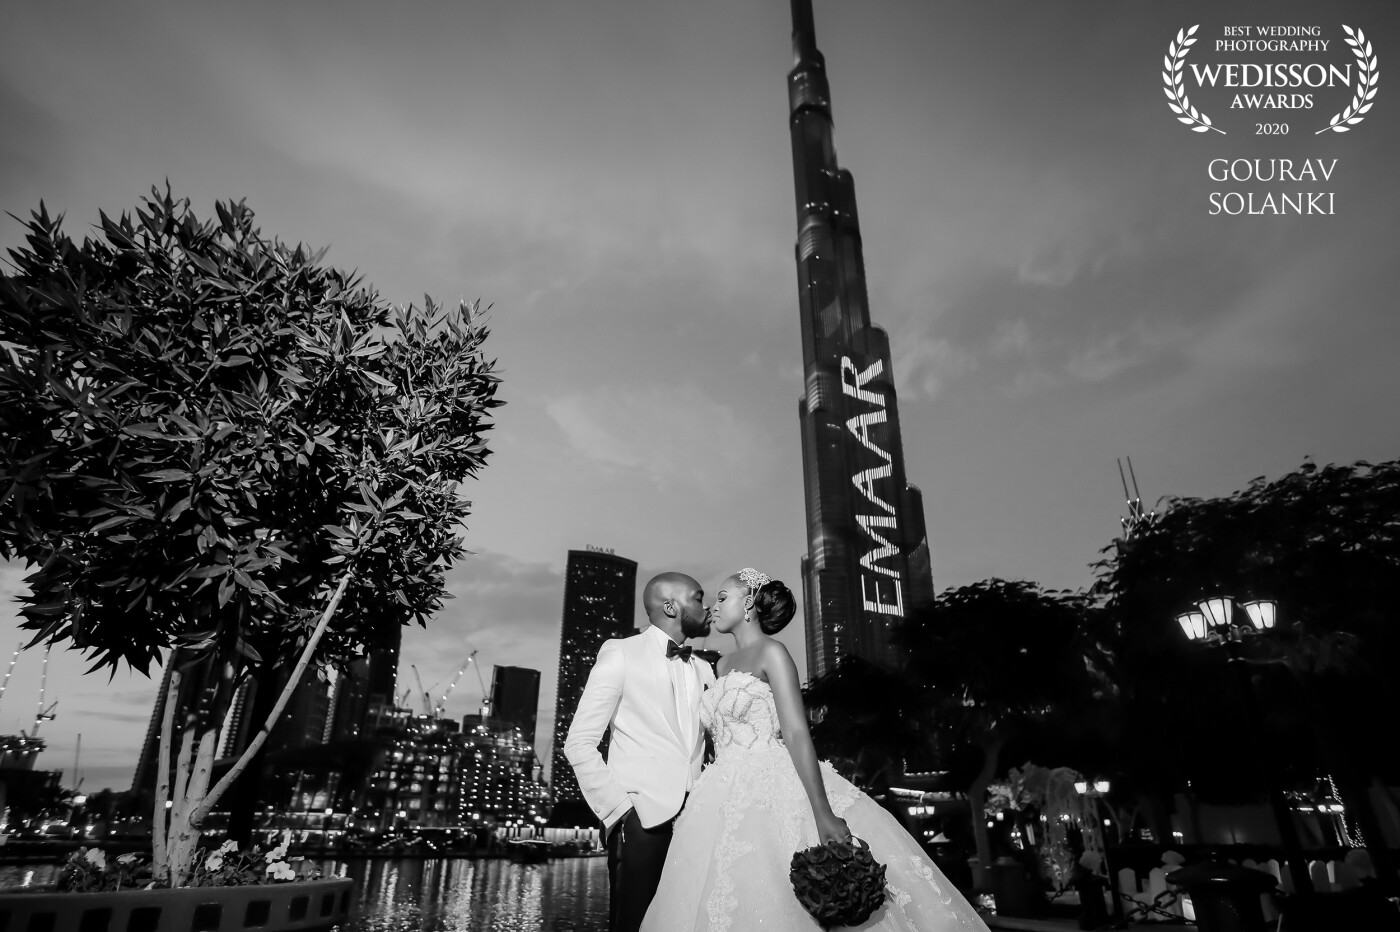 "A journey once begins has no end"<br />
This was our first ever Nigerian wedding we shoot for this couple in the heart of Dubai with a view of the world's tallest structure Burj Khalifa touching the sky just under this magnificent structure our couple promising each other "Together our love will touch the sky". <br />
